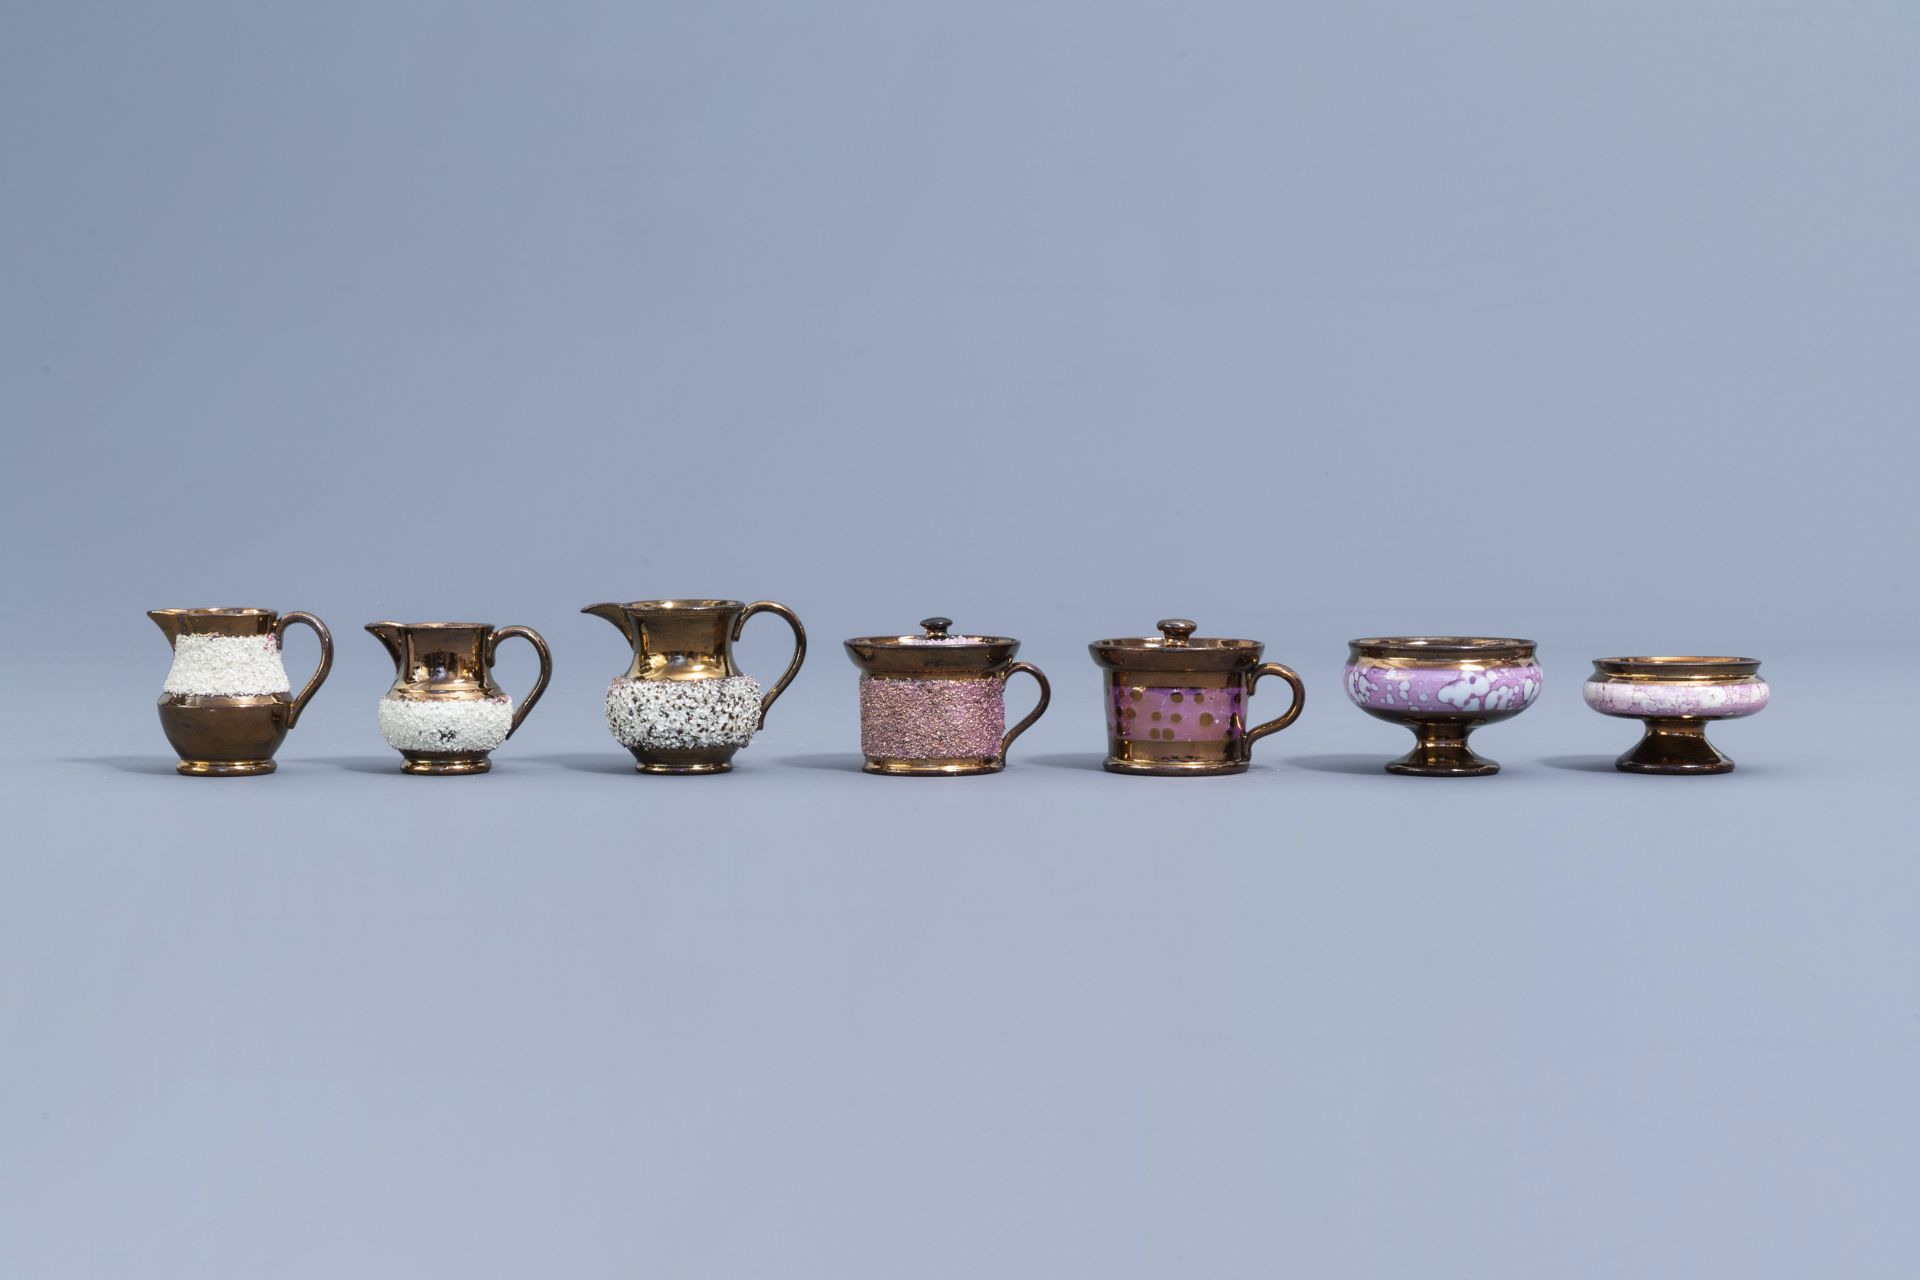 A varied collection of English lustreware items, 19th C. - Image 7 of 42